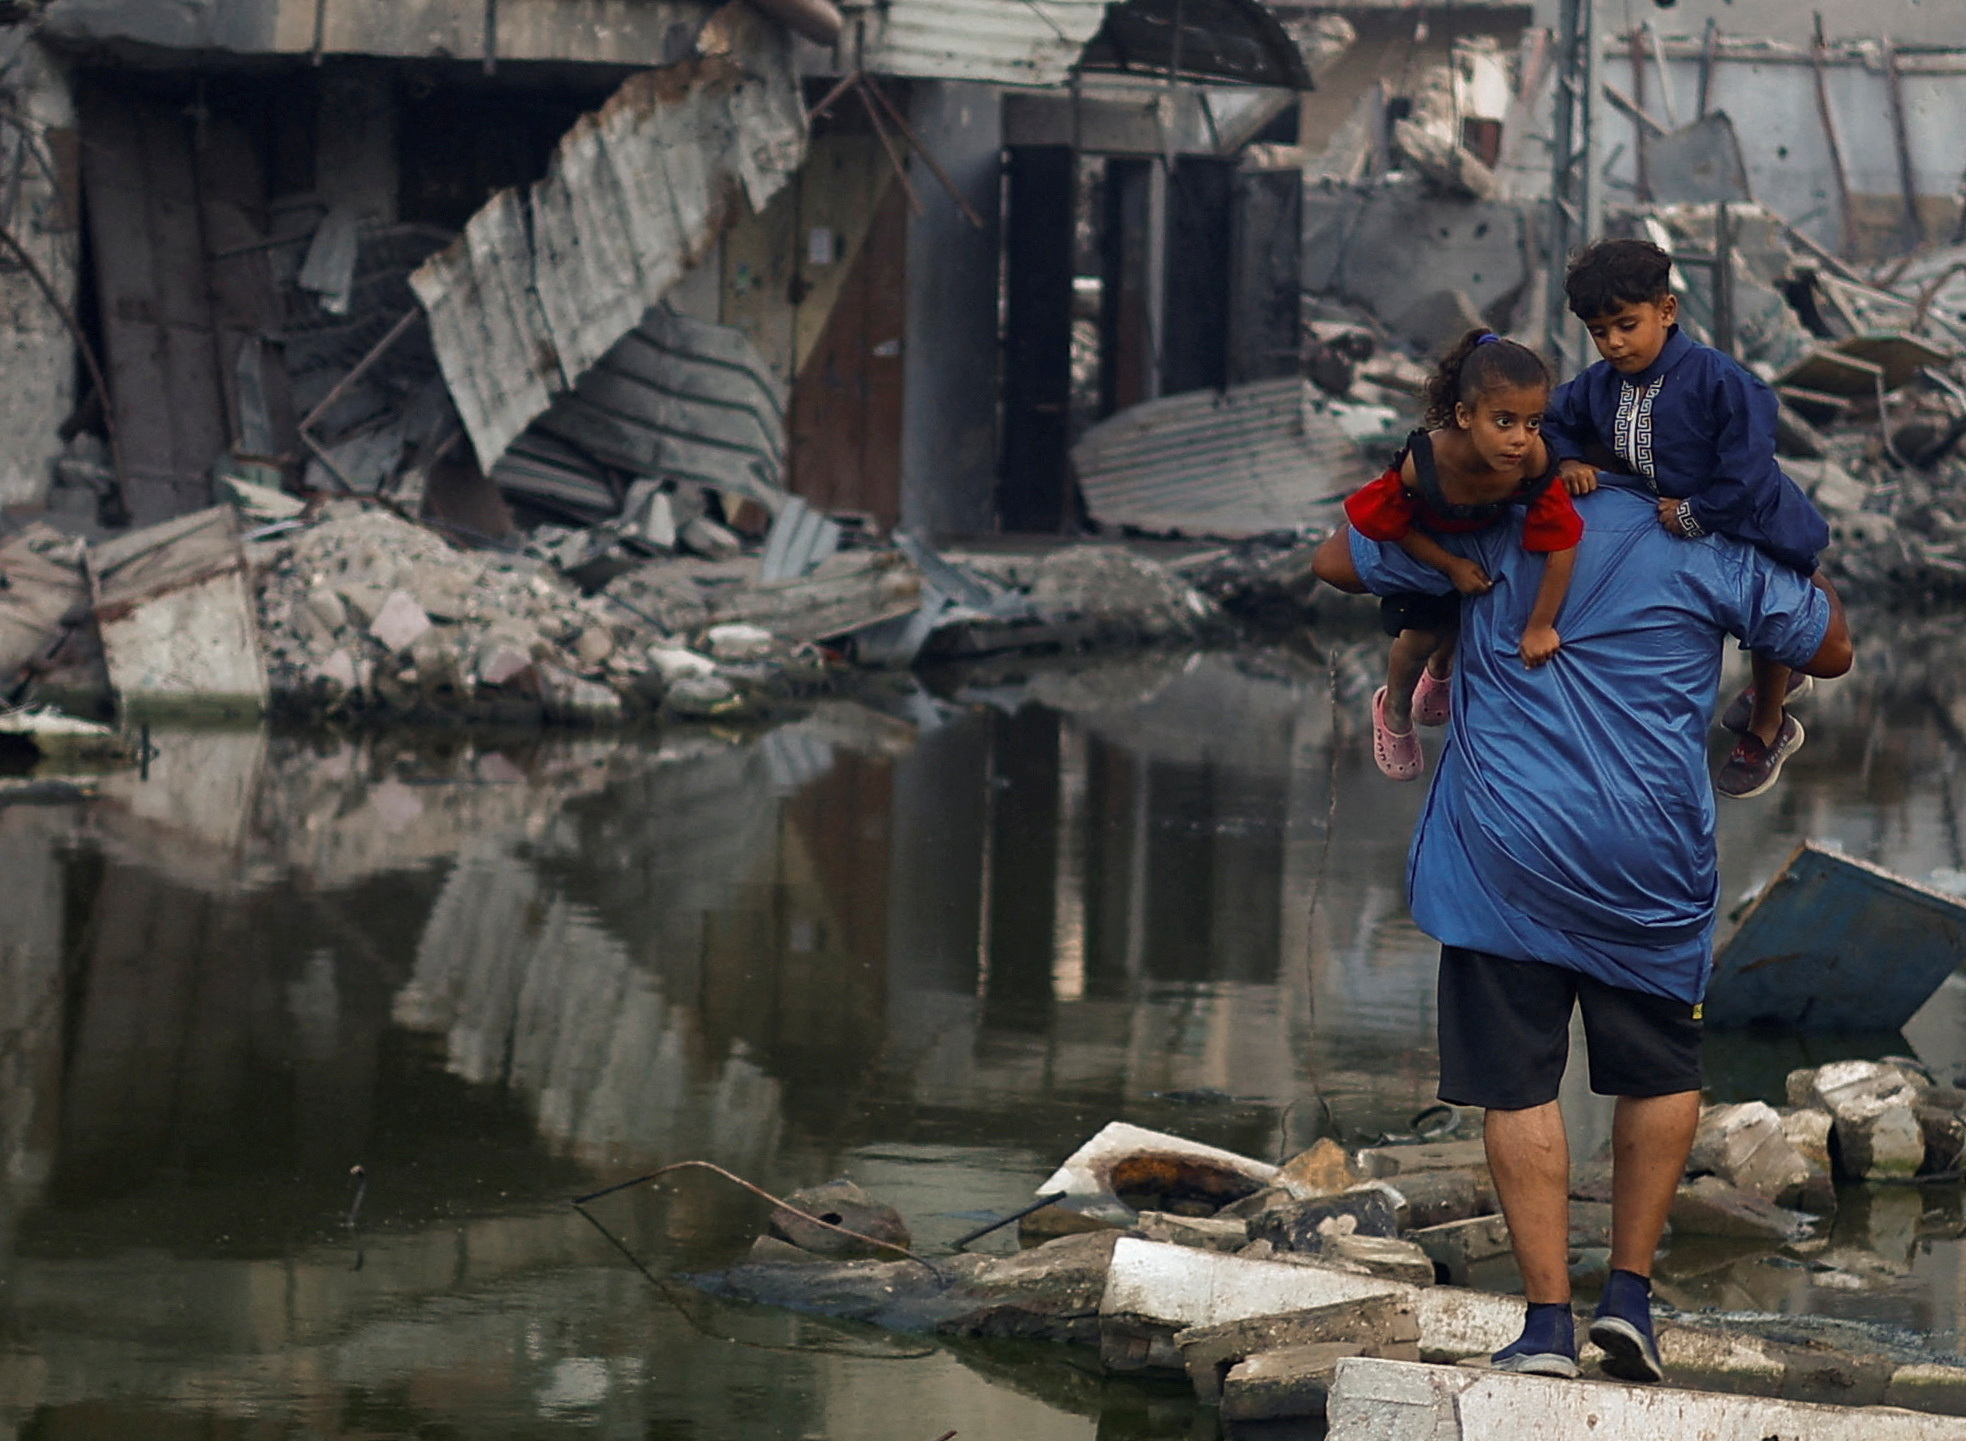 A Palestinian man holds his children as he walks next to buildings destroyed in an Israeli strike, in Khan Younis